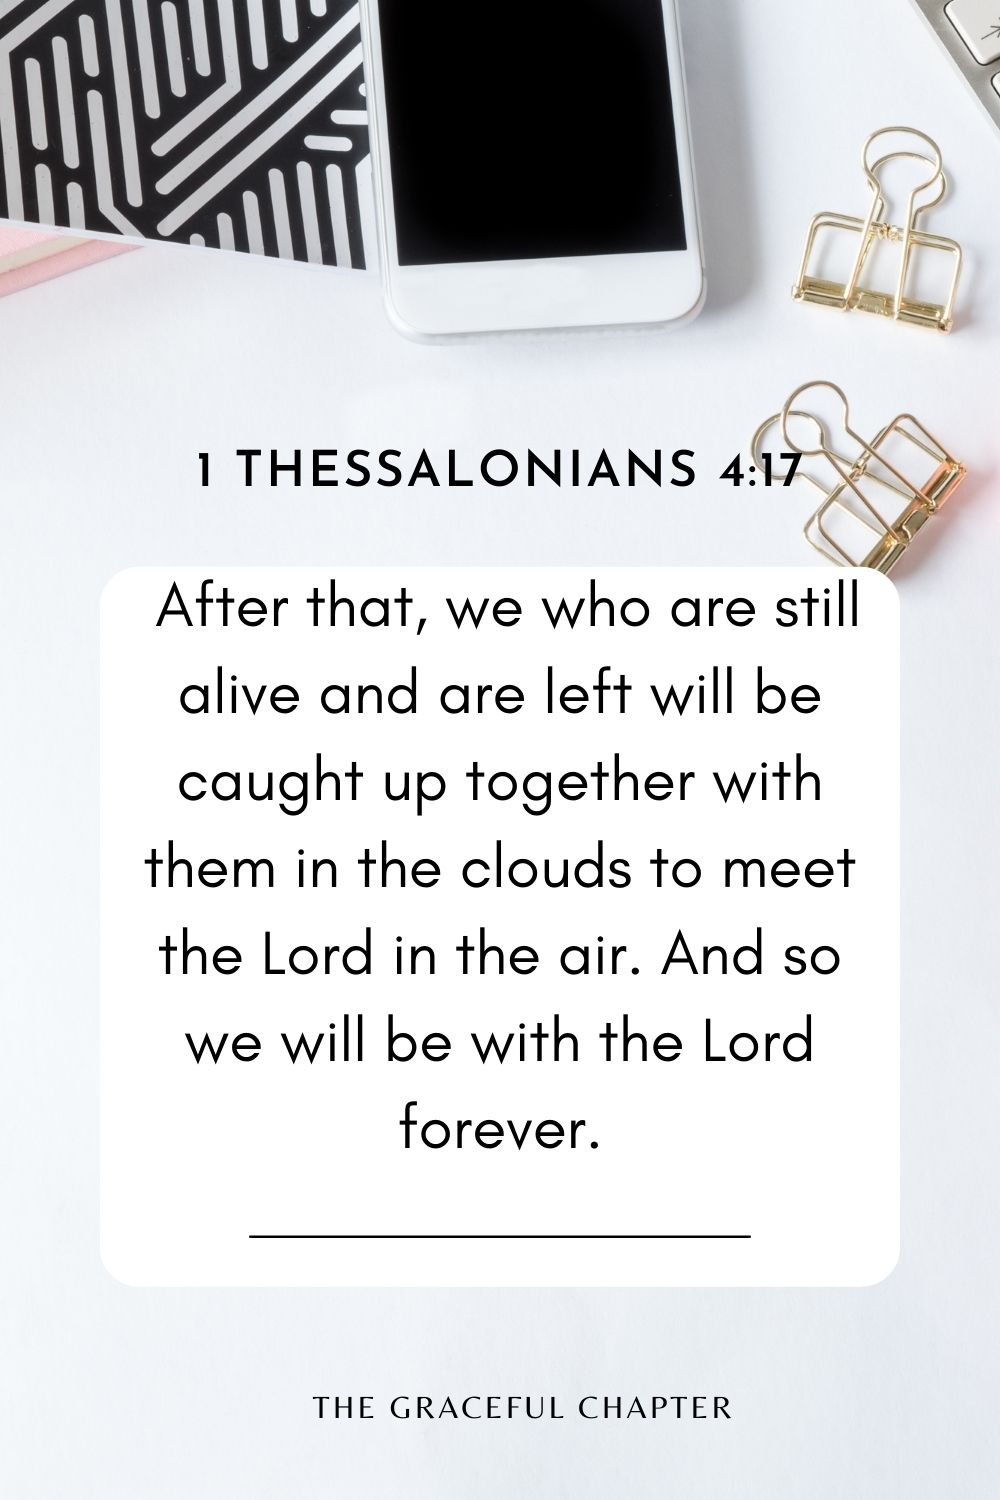 After that, we who are still alive and are left will be caught up together with them in the clouds to meet the Lord in the air. And so we will be with the Lord forever. 1 Thessalonians 4:17